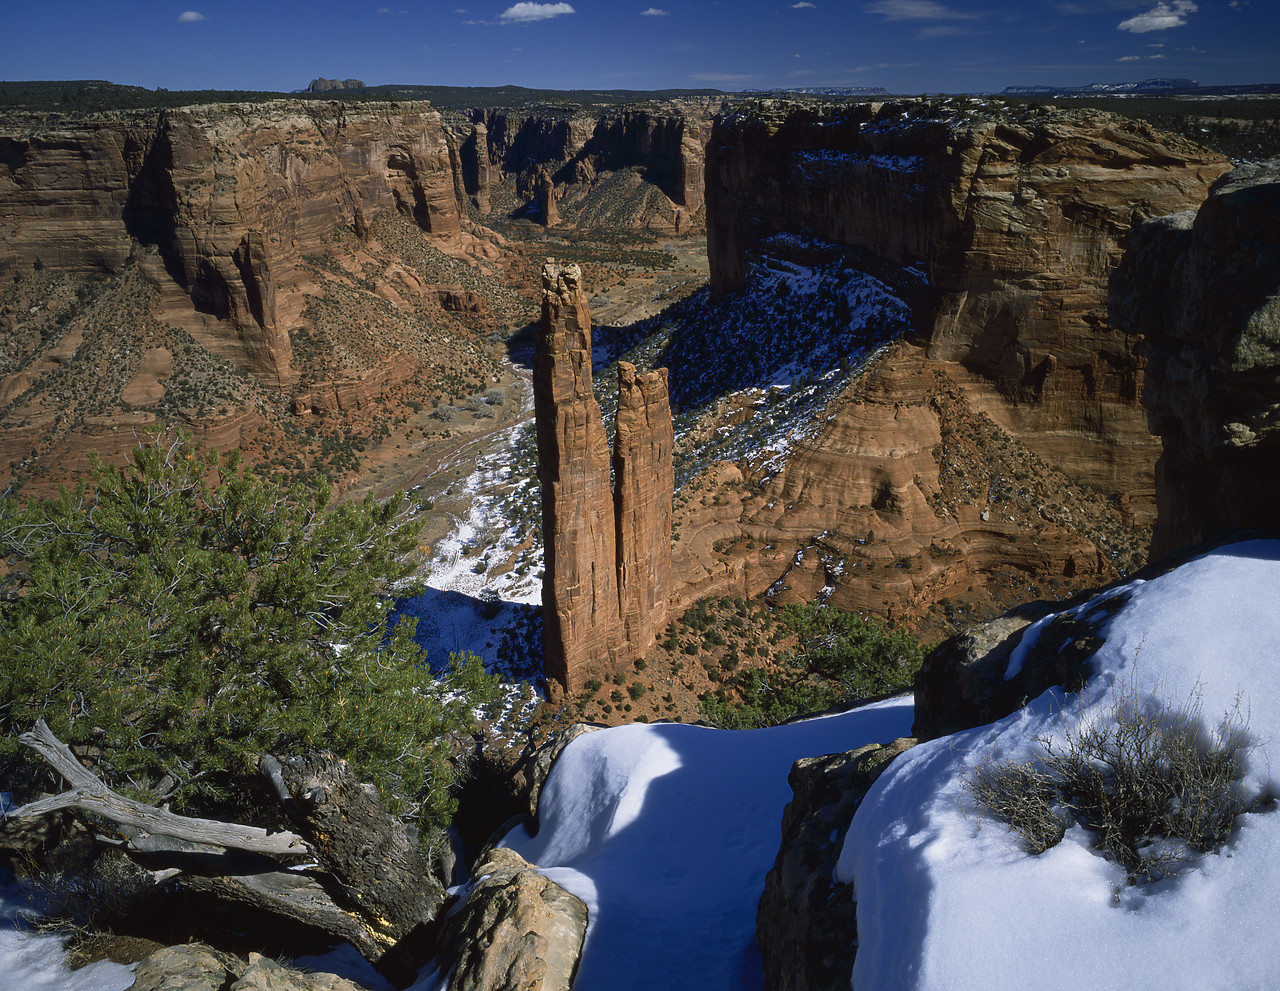 #891911-2 - Spider Rock in Winter, Canyon de Chelly National Monument, Arizona, USA